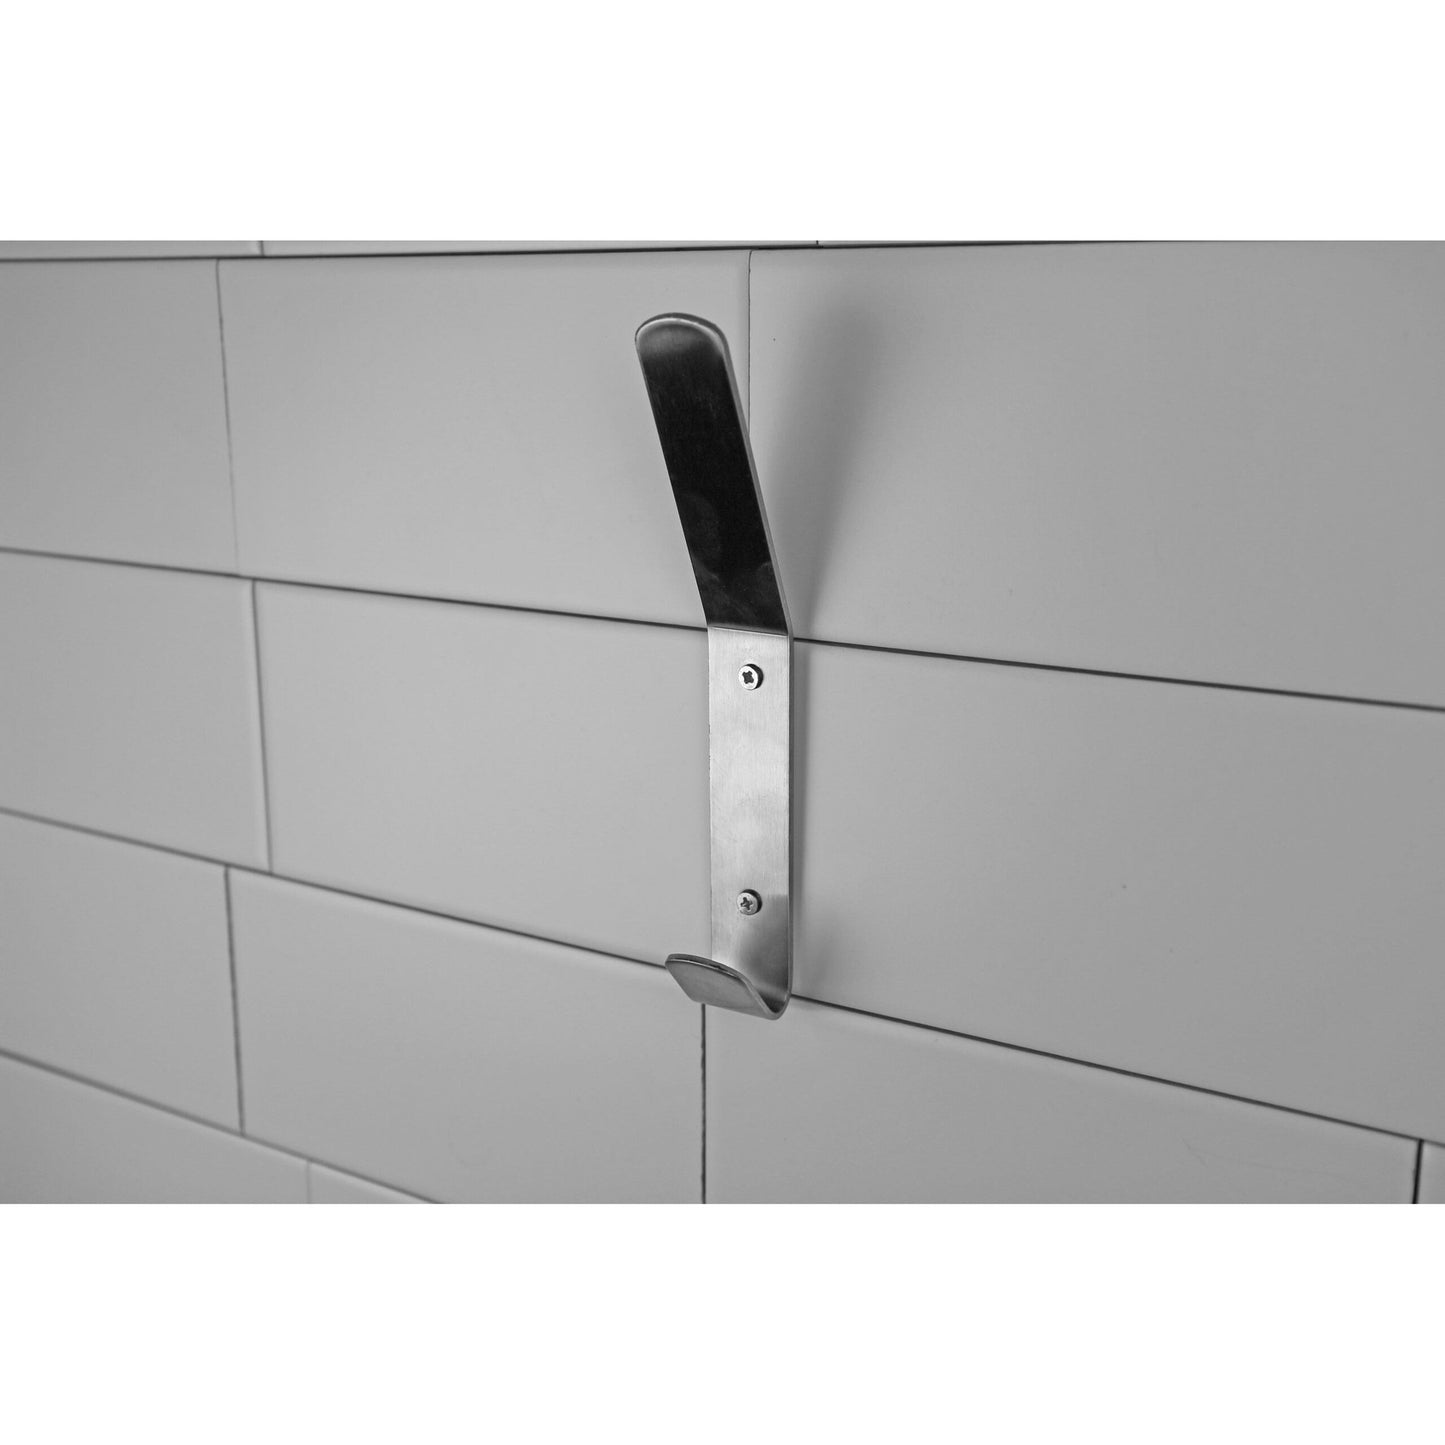 Frost 1146 Wall Mounted Brushed Stainless Steel Coat Hook